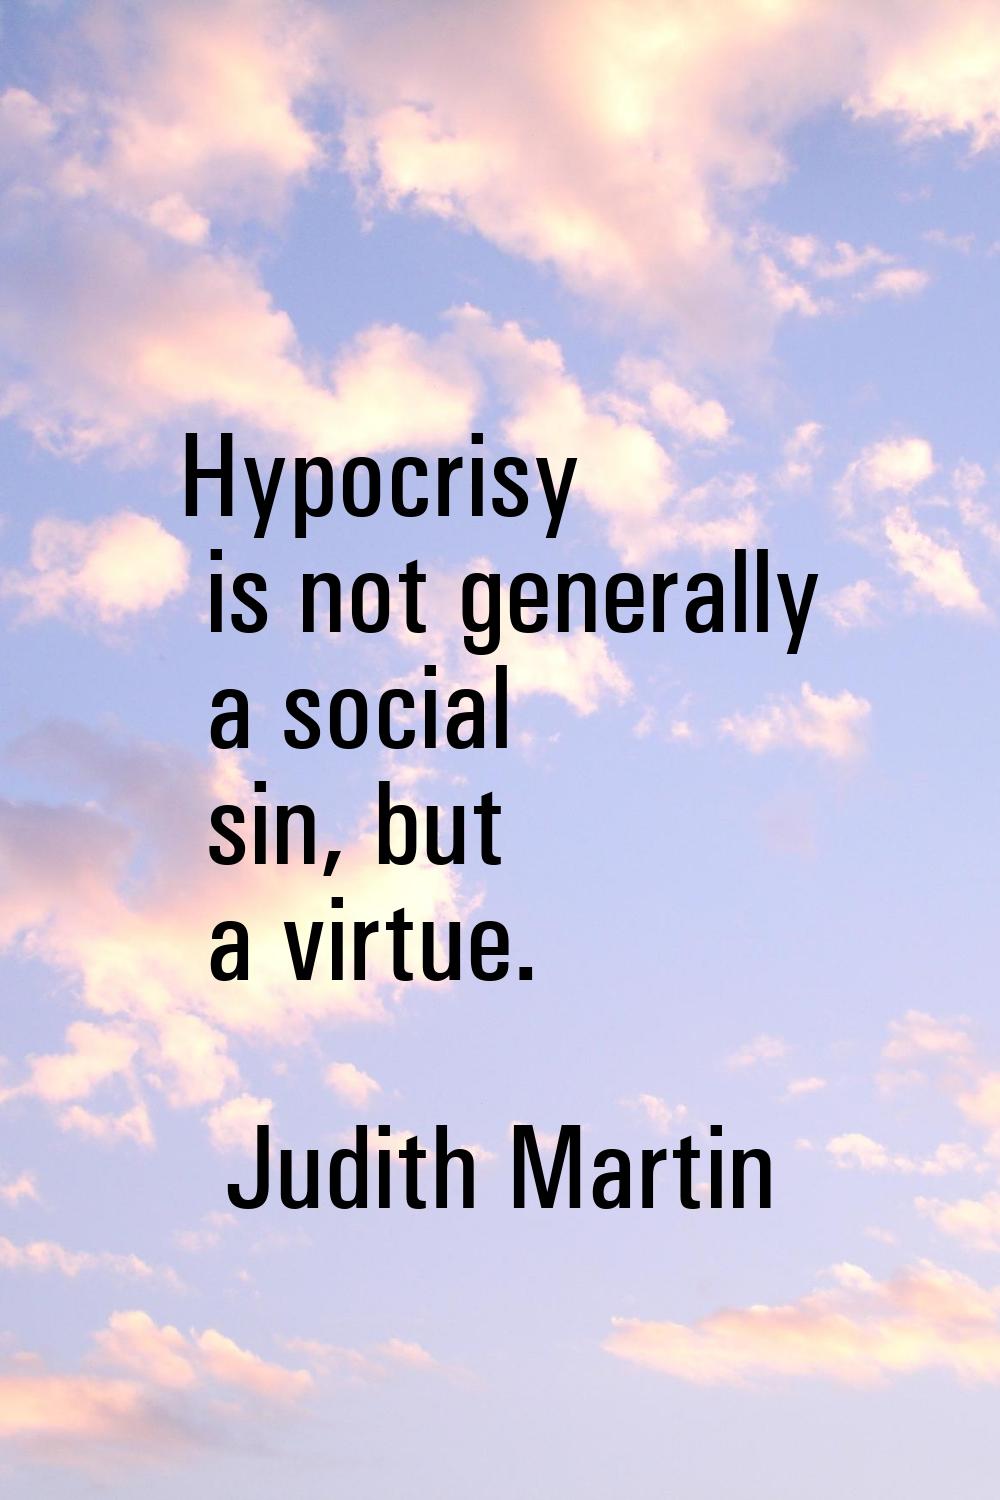 Hypocrisy is not generally a social sin, but a virtue.